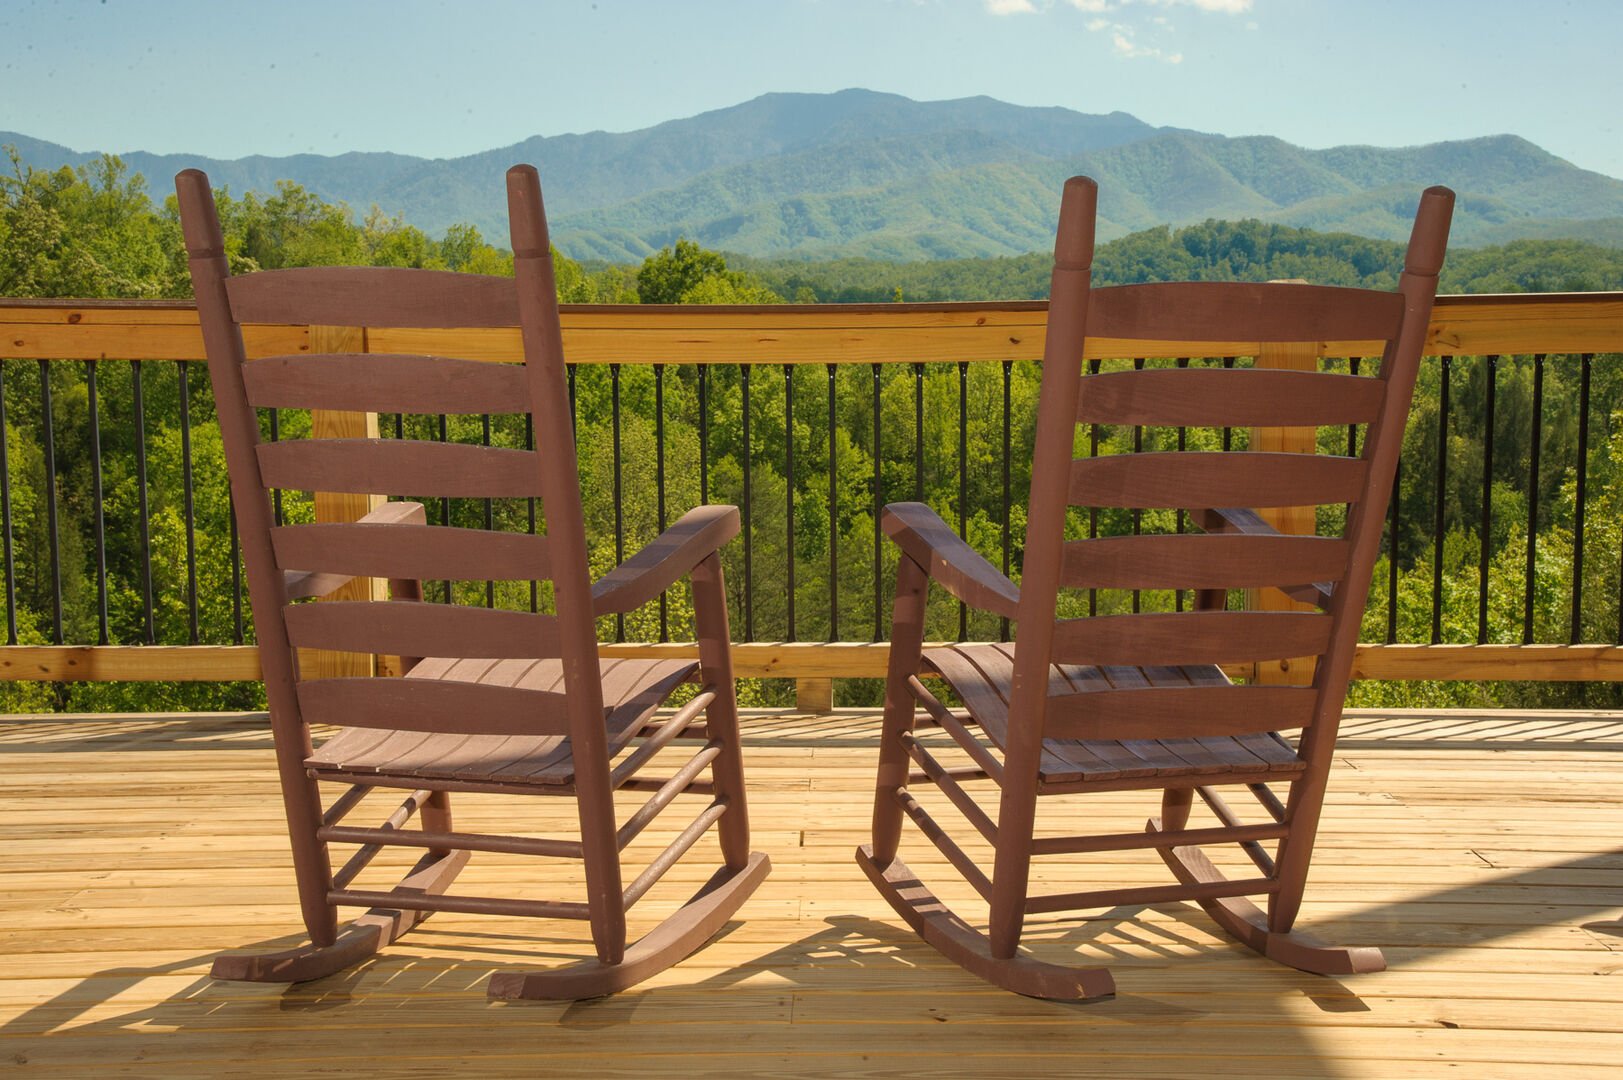 A Couple of Rocking Chairs in the Deck with Mountain View.